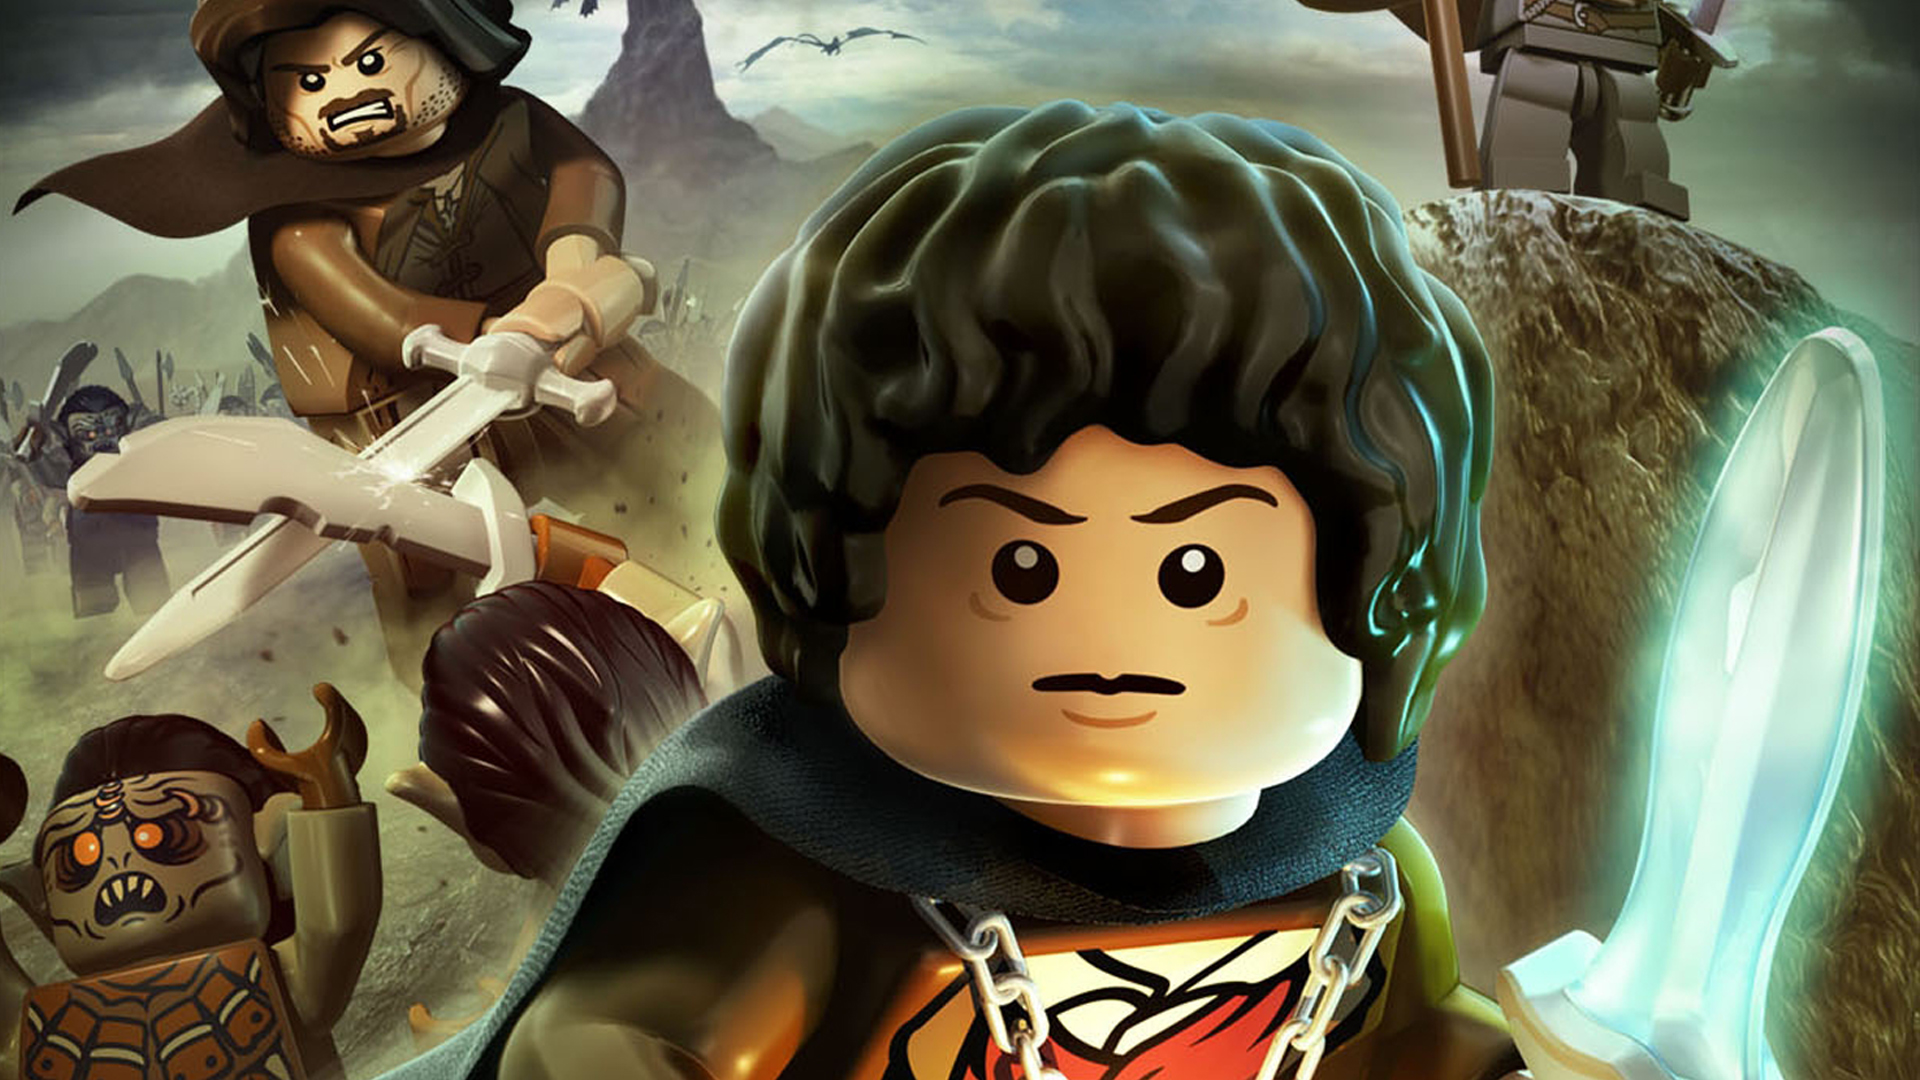 Lego The Lord Of The Rings Computer Wallpapers, Desktop - Lego Lord Of The Rings - HD Wallpaper 